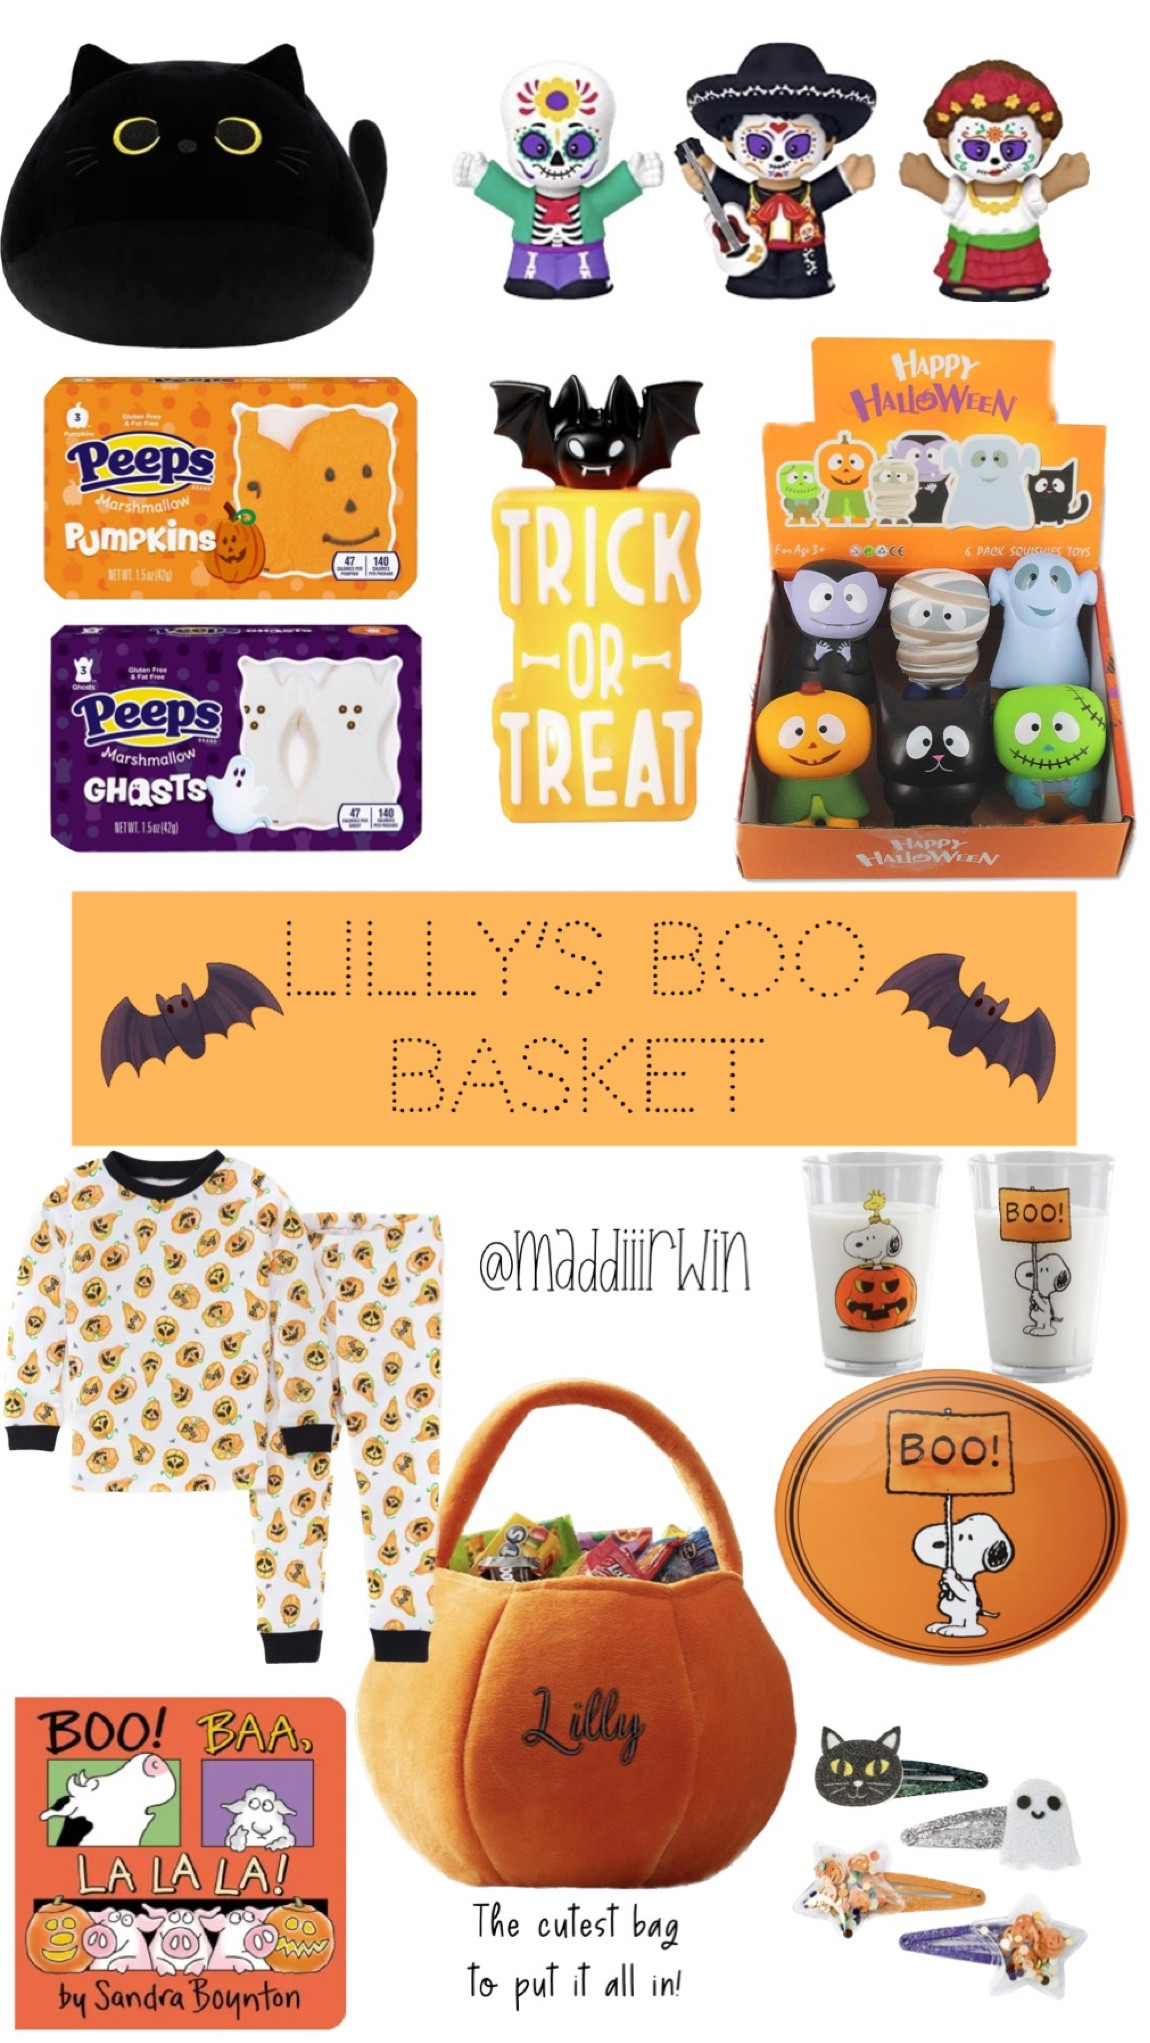 BUKBUVLO Halloween Straw Cover … curated on LTK